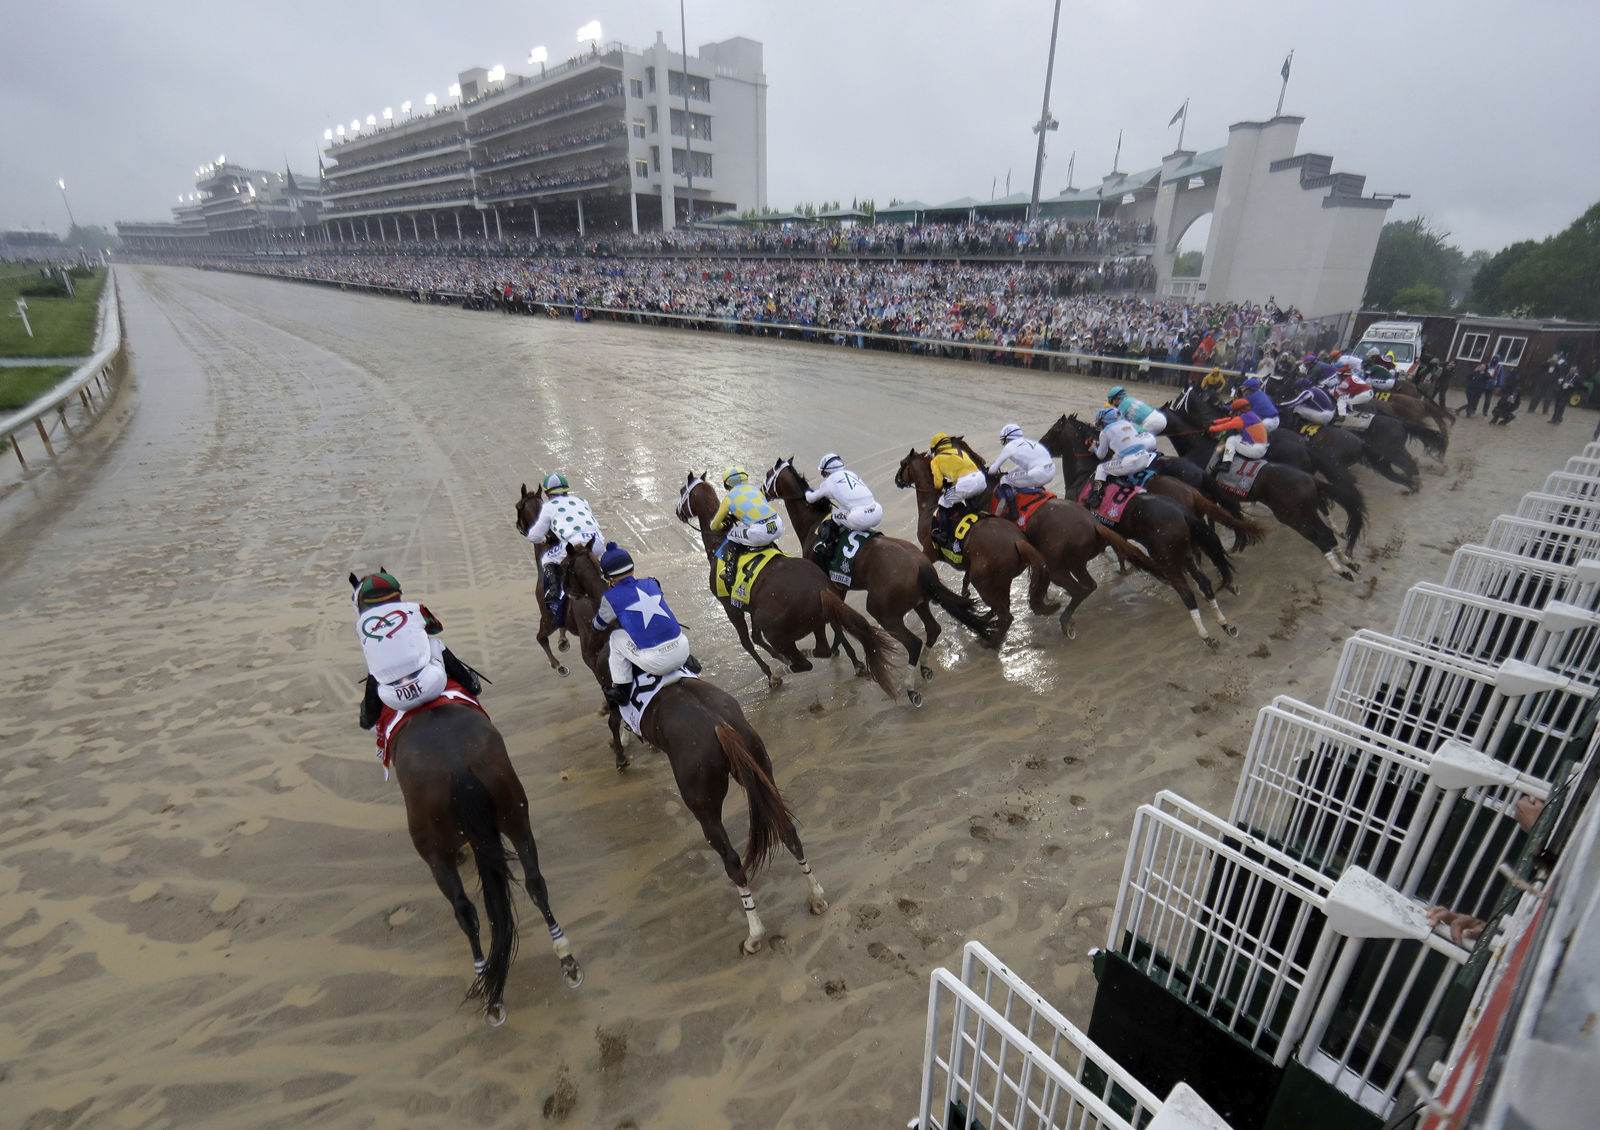 Horses leave the starting gate during the 144th running of the Kentucky Derby horse race at Churchill Downs Saturday, May 5, 2018, in Louisville, Ky. (AP Photo/John Minchillo)